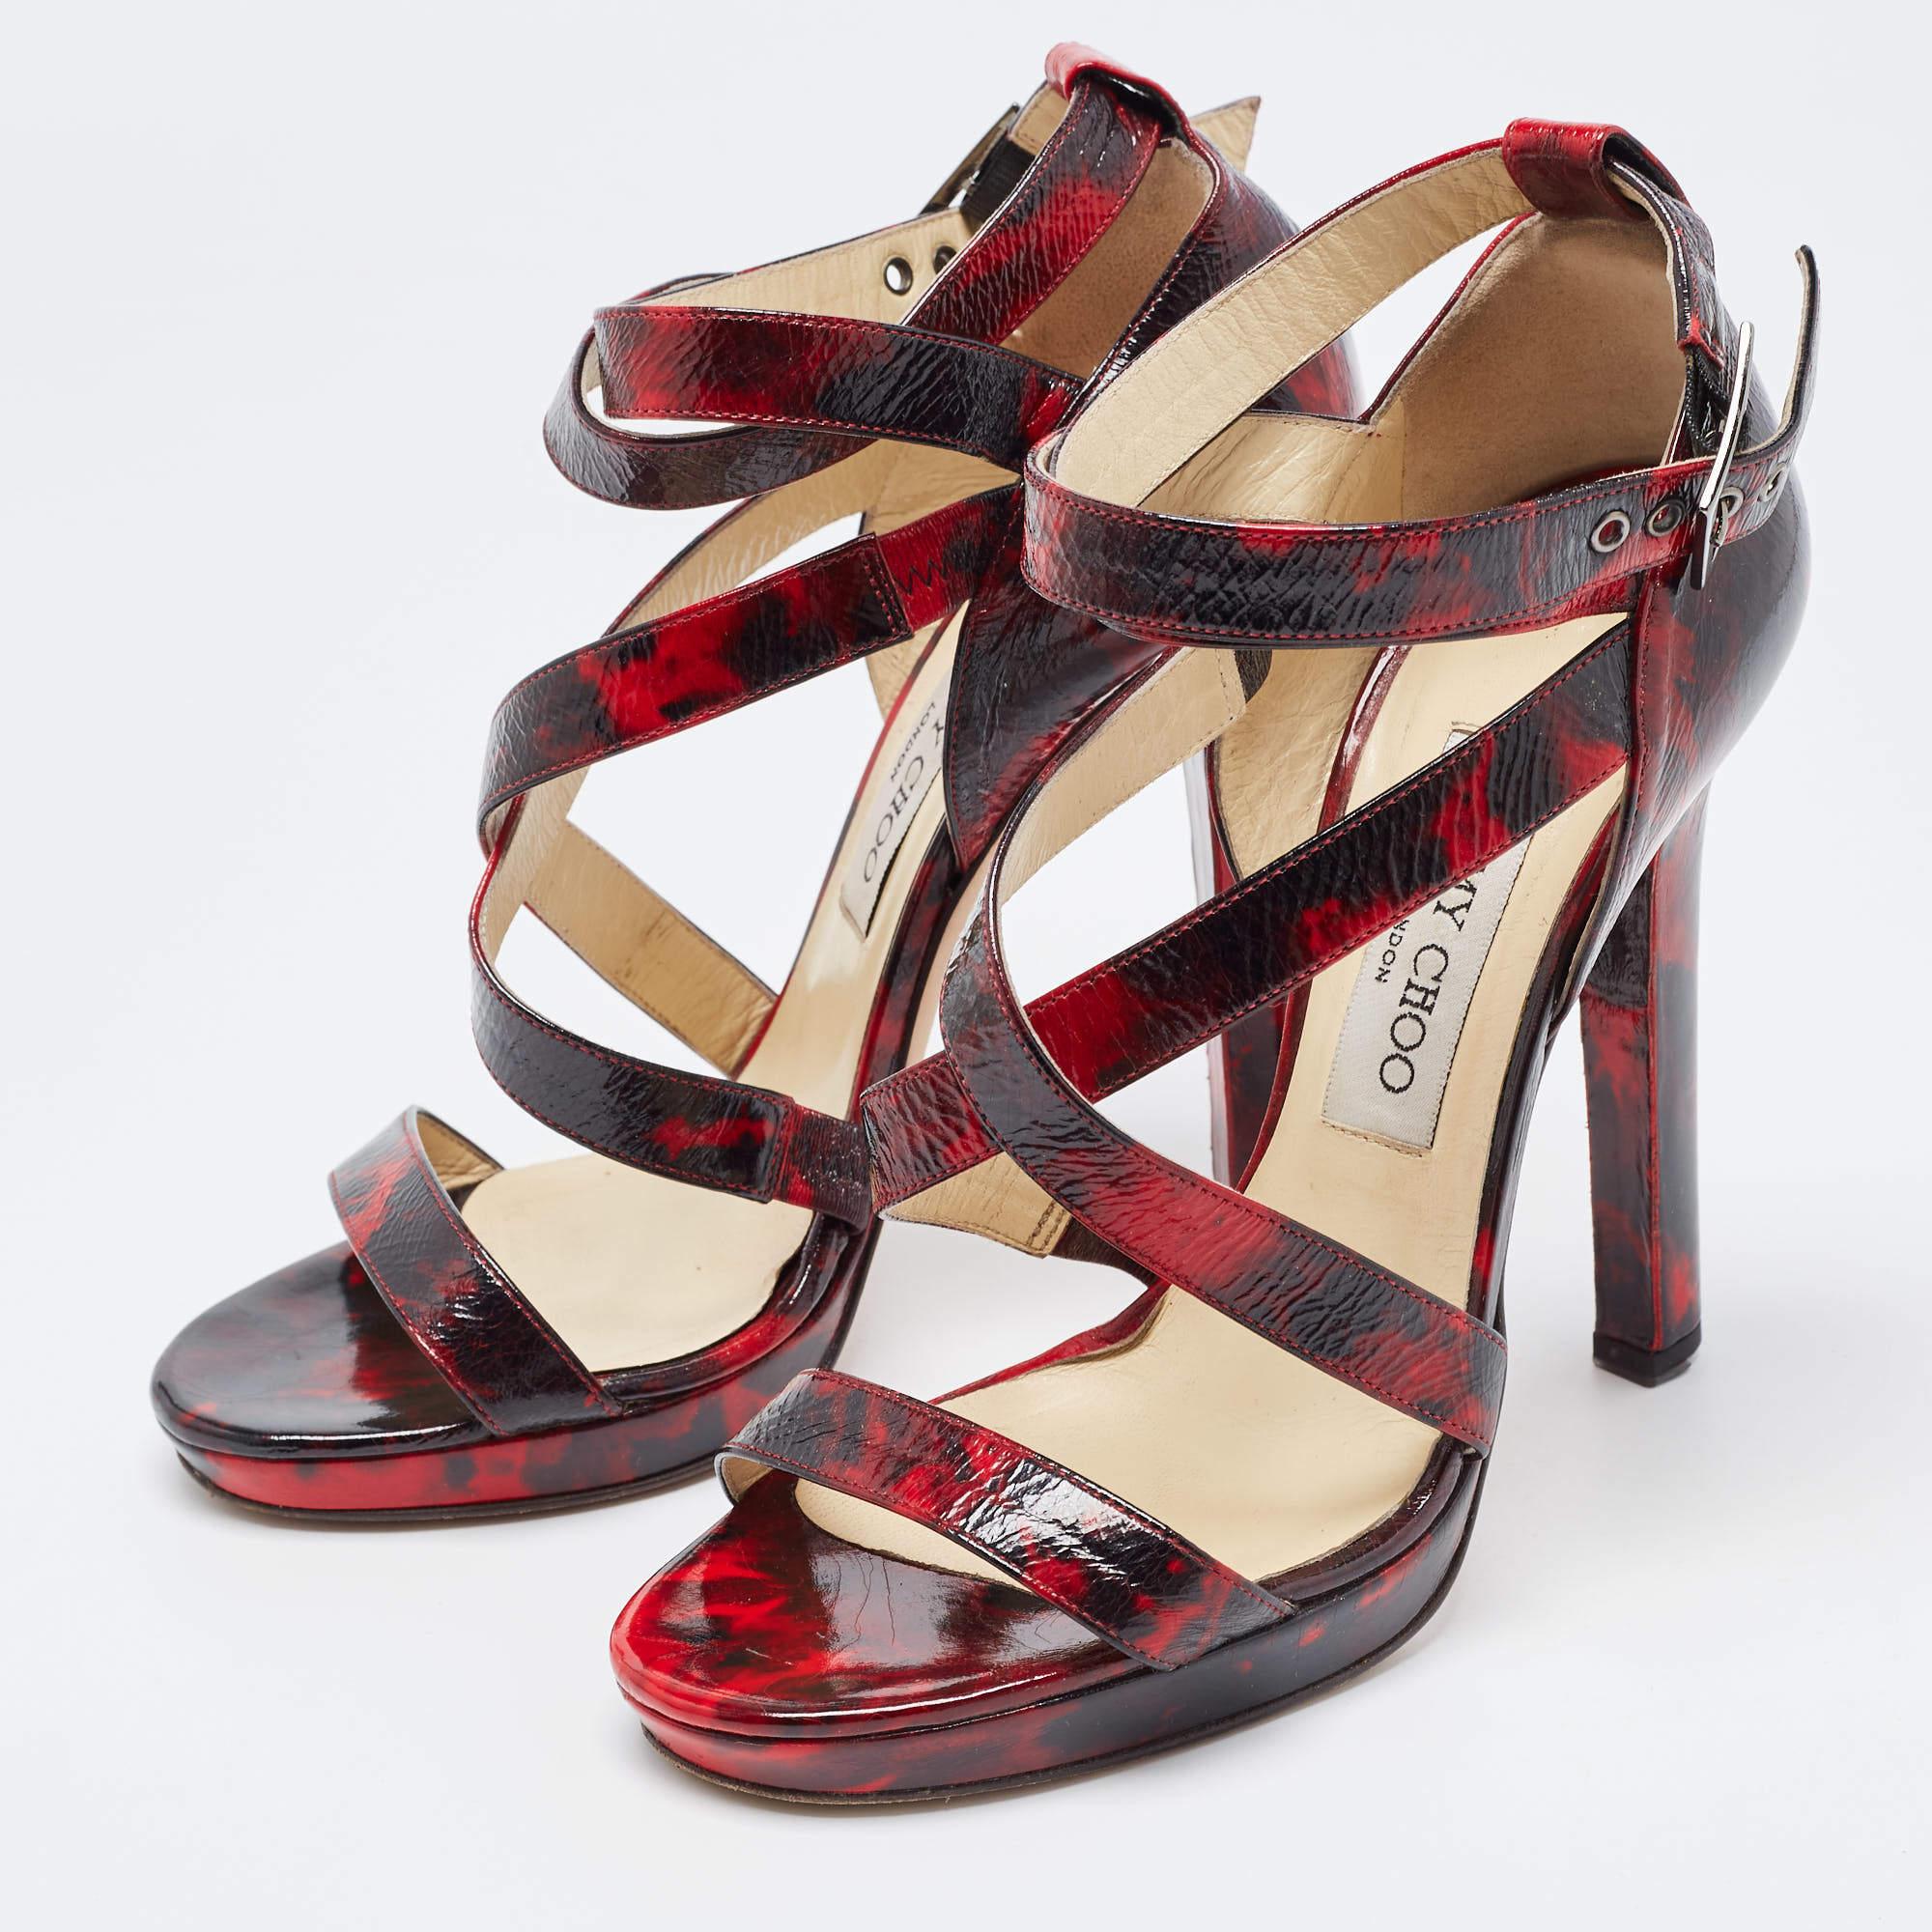 Jimmy Choo Red/Black Leather Criss Cross Ankle Strap Sandals Size 37.5 In Good Condition For Sale In Dubai, Al Qouz 2